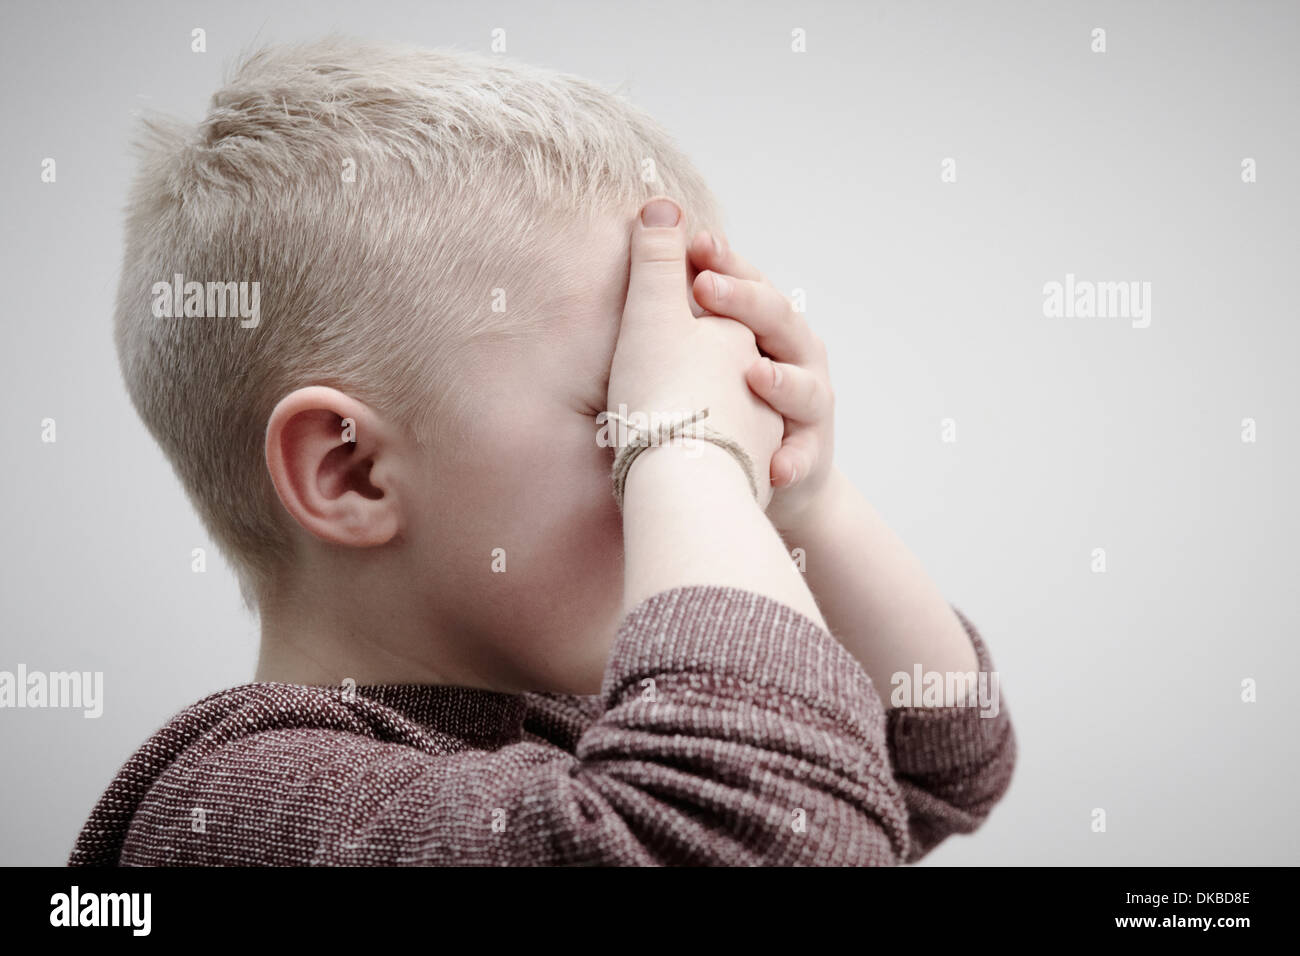 Portrait of boy wearing brown jumper, covering face with hands Stock Photo